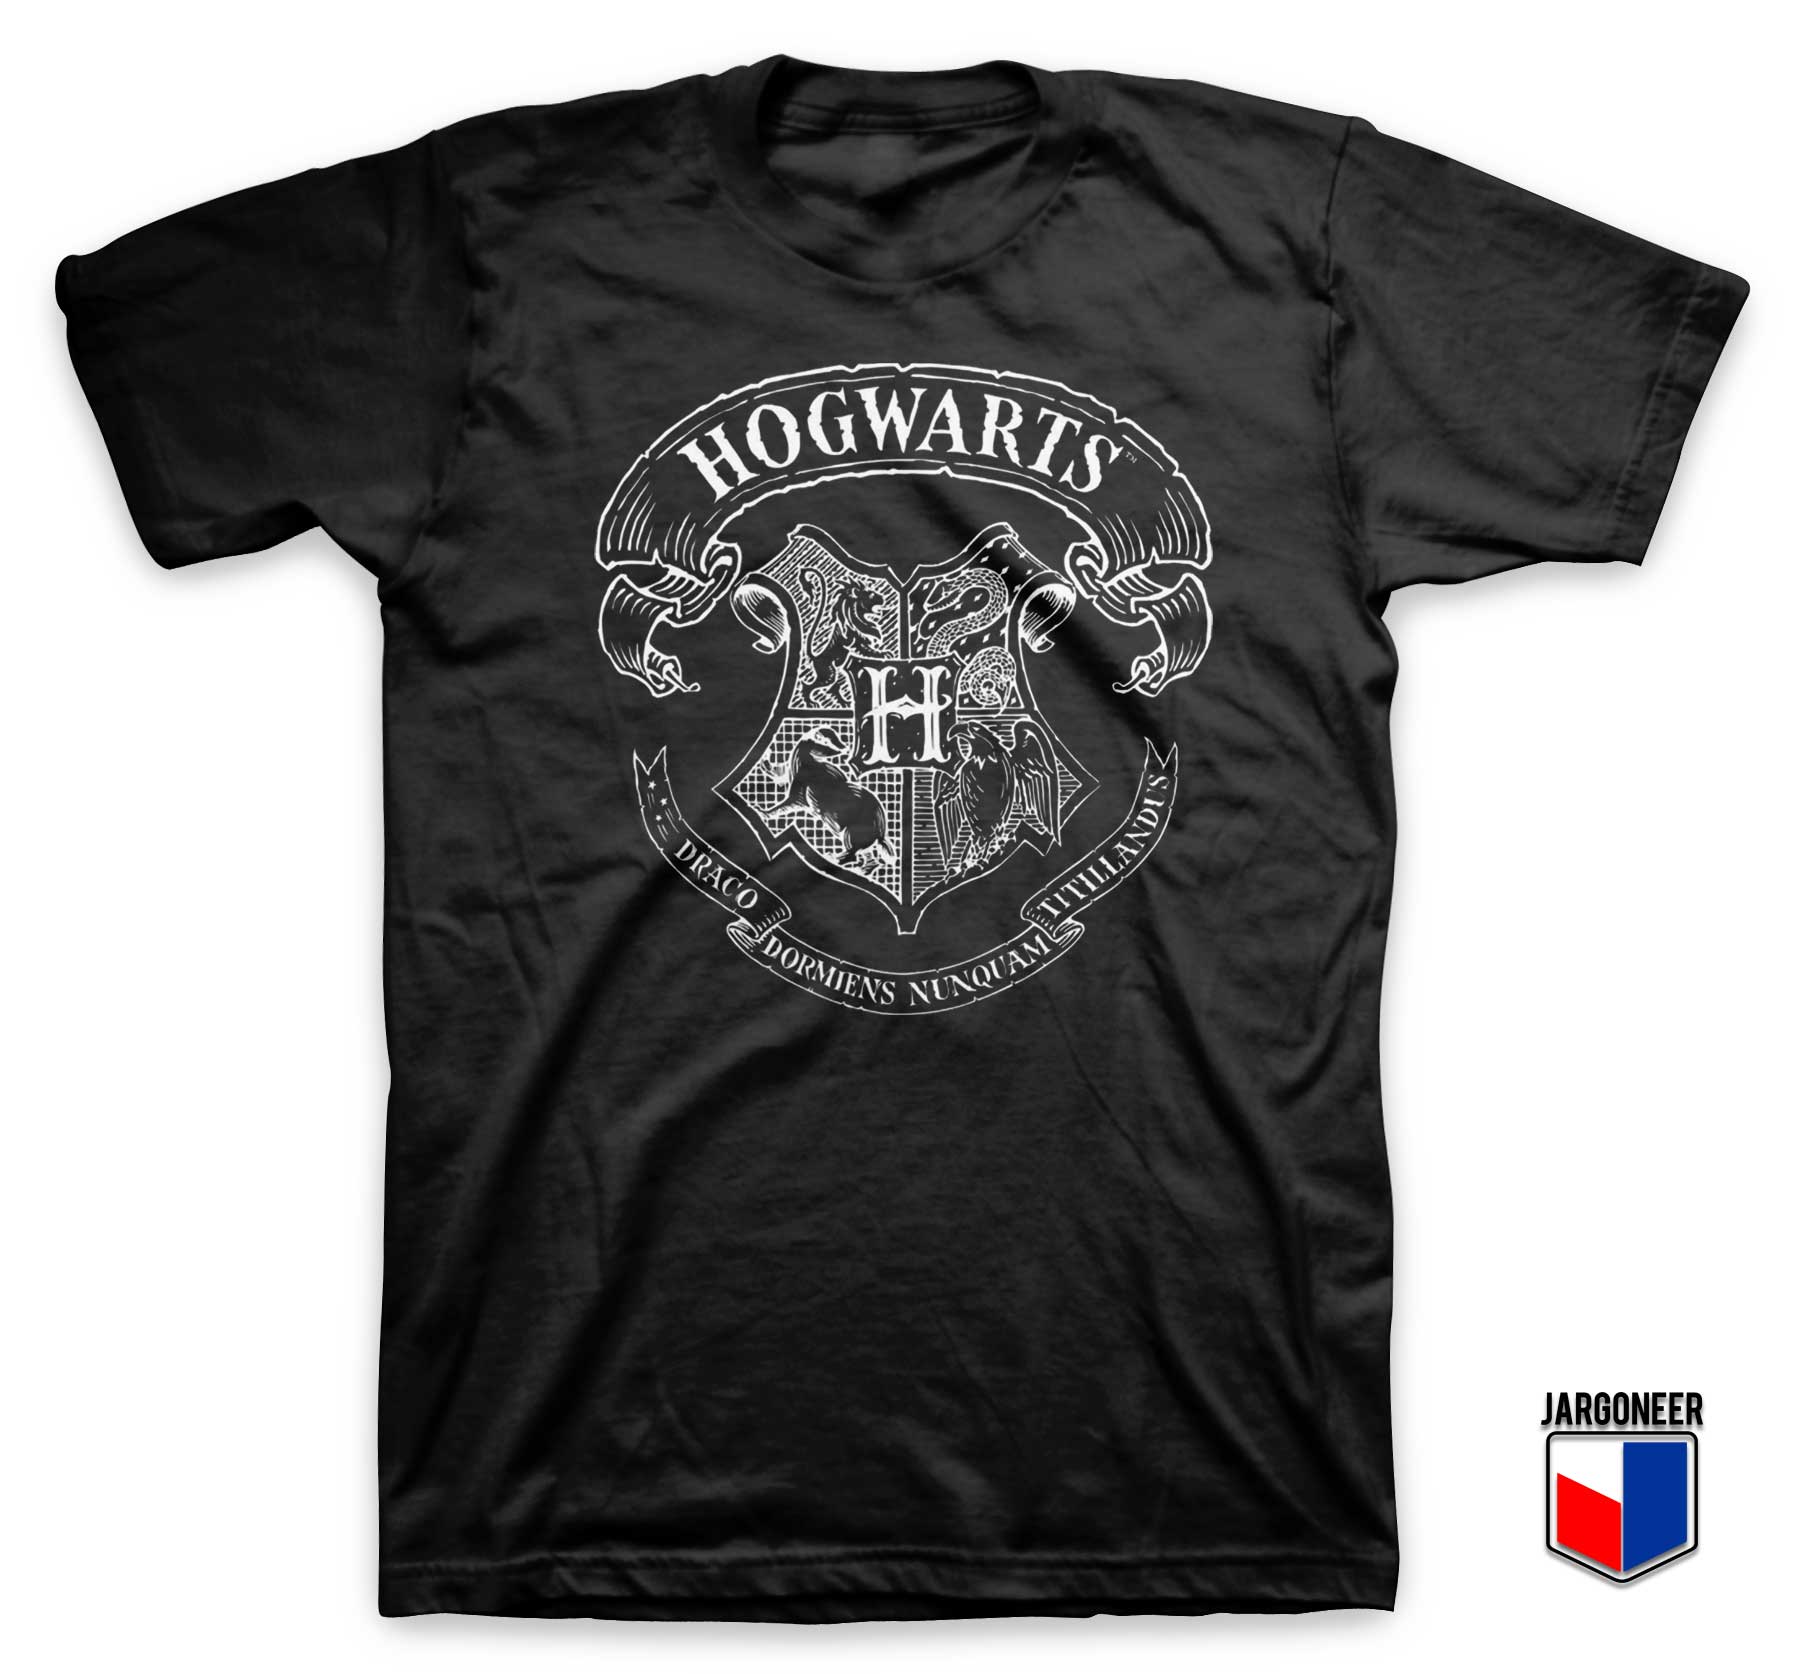 Buy Now Harry Potter Hogwarts T Shirt with Unique Graphic